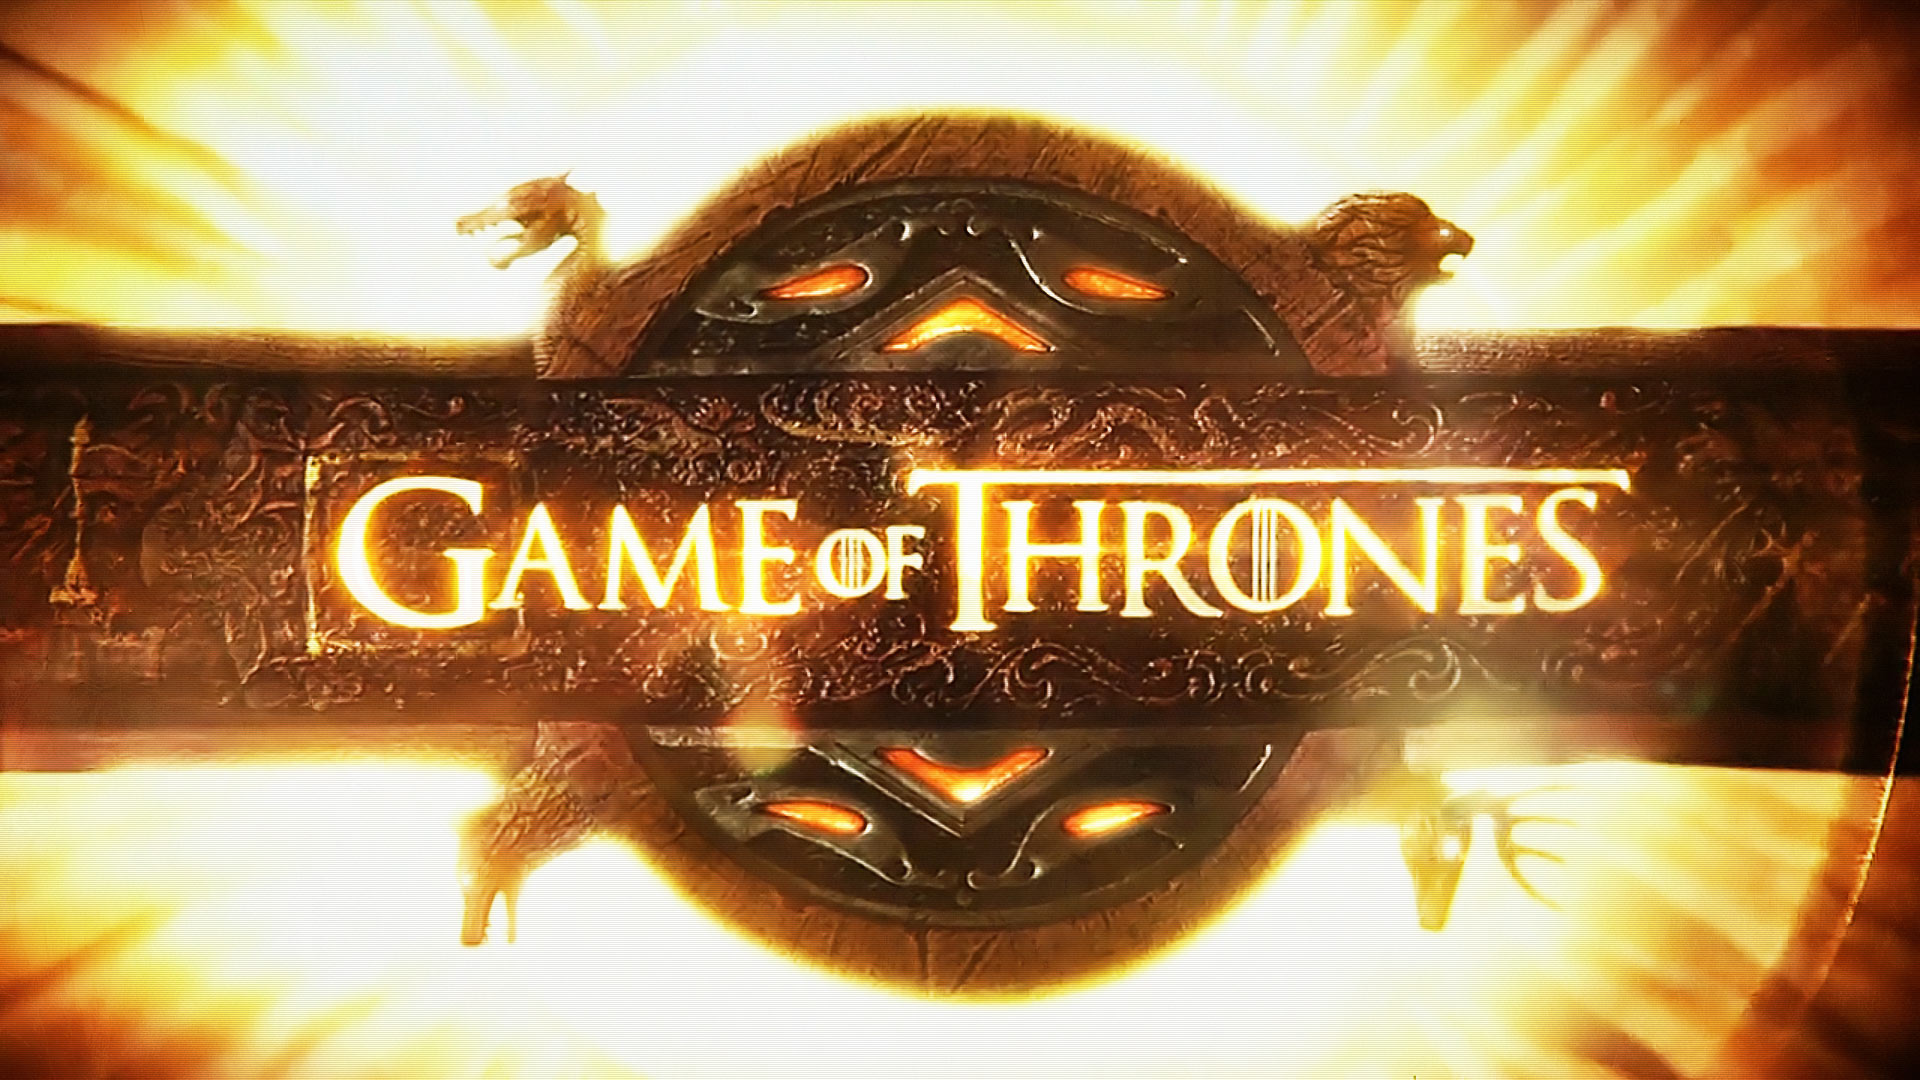 Game of Thrones Predictions: How will Season 5 be Different from the Books?